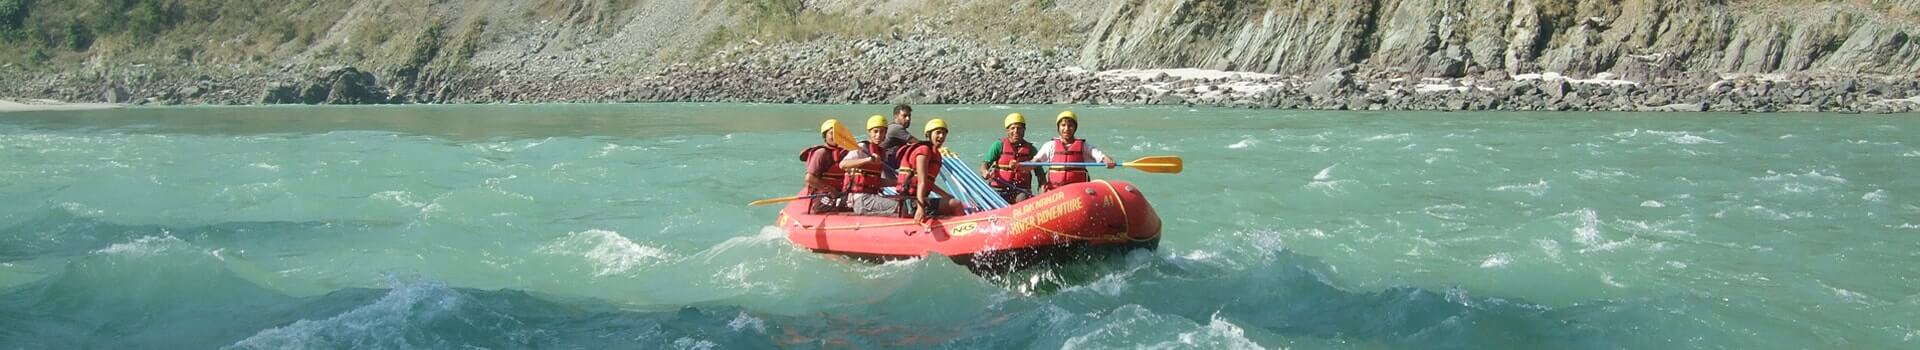 river rafting in India